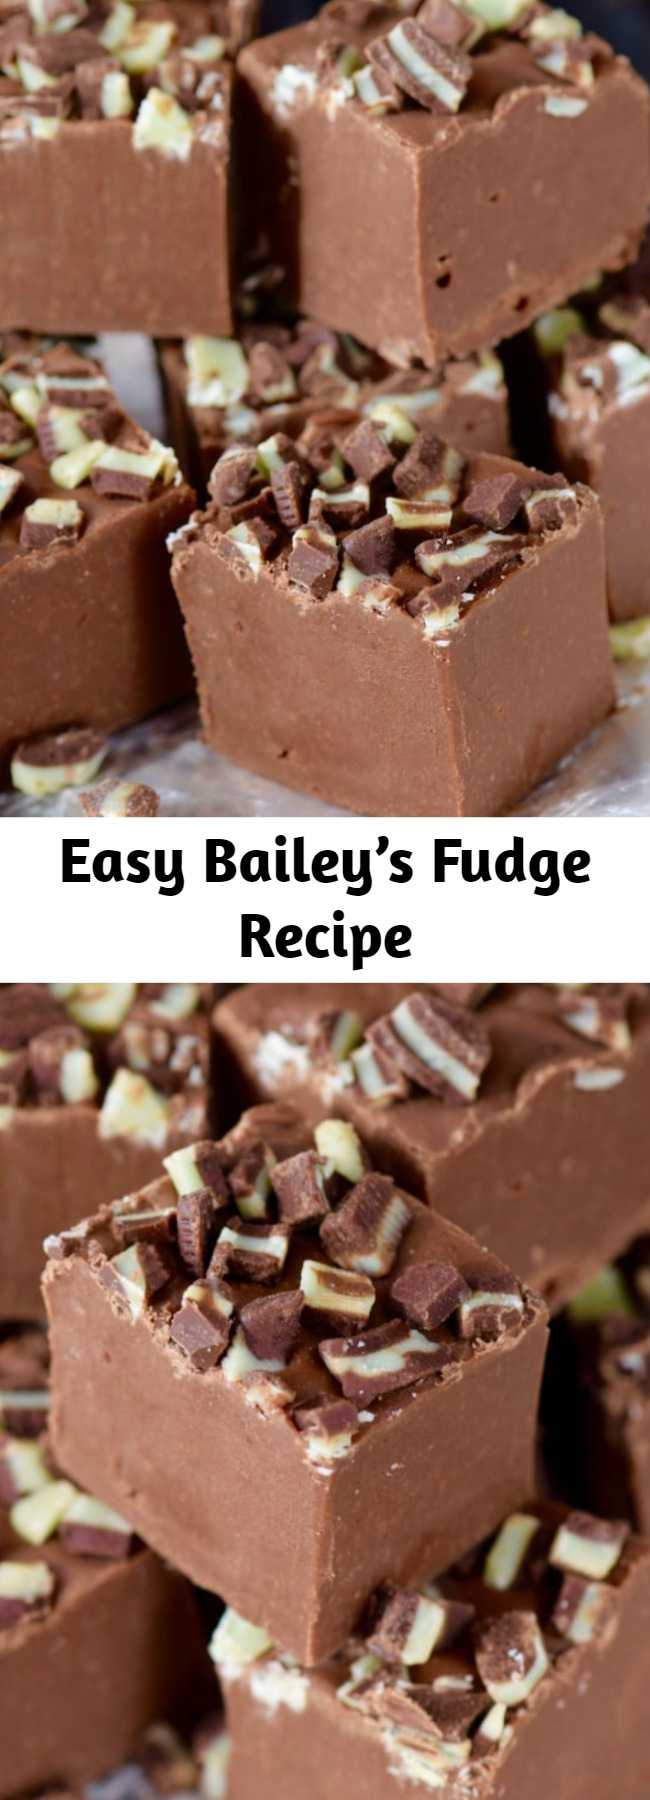 Easy Bailey’s Fudge Recipe - This Bailey’s Fudge is easy to make, tastes absolutely delicious, and is the perfect amount of rich amazingness!